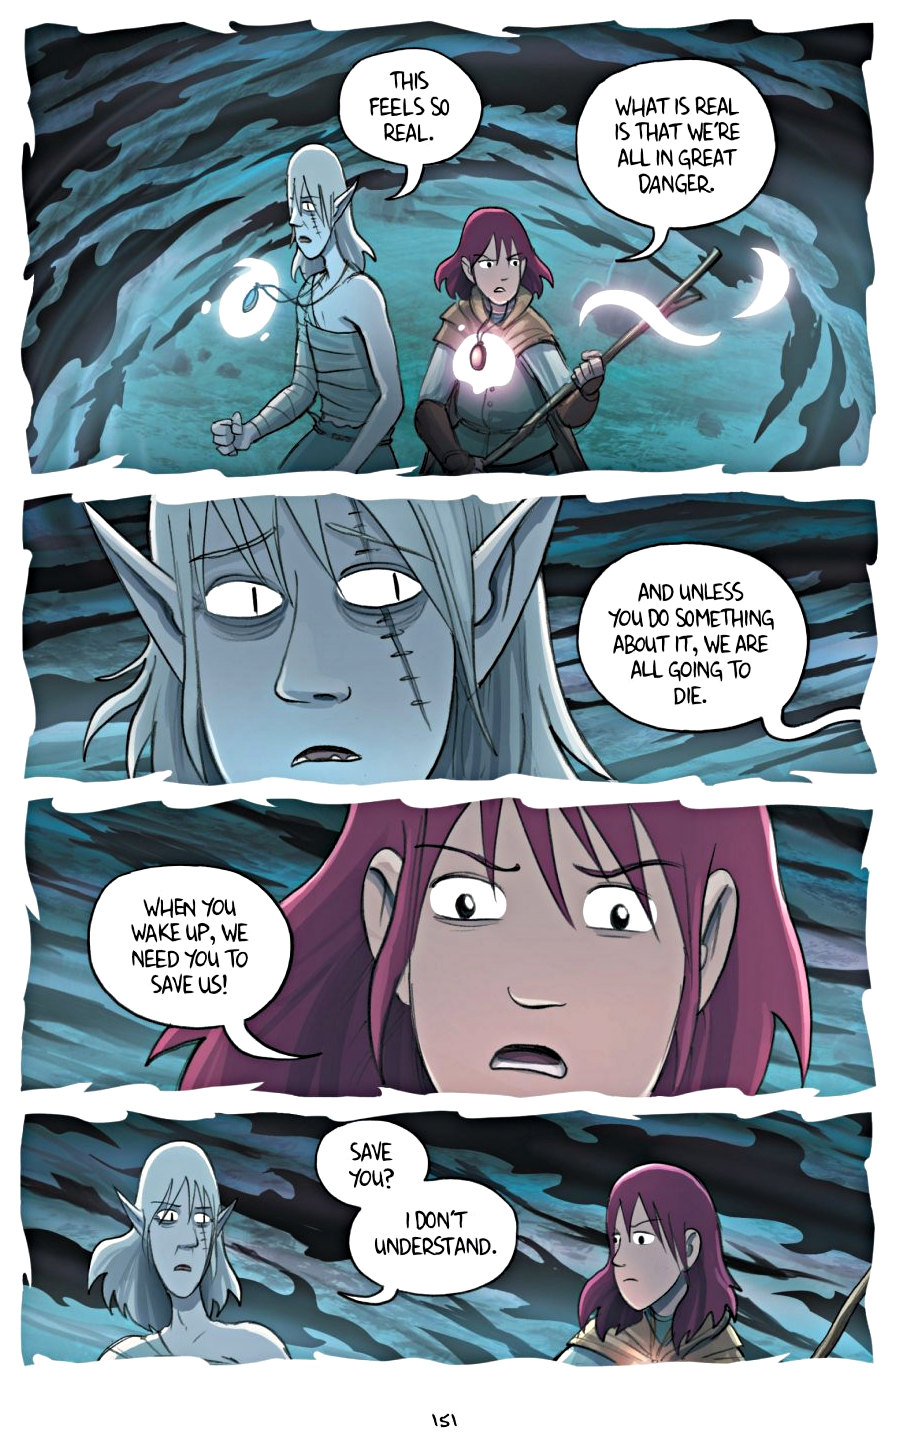 page 151 of amulet 5 prince of the elves graphic novel